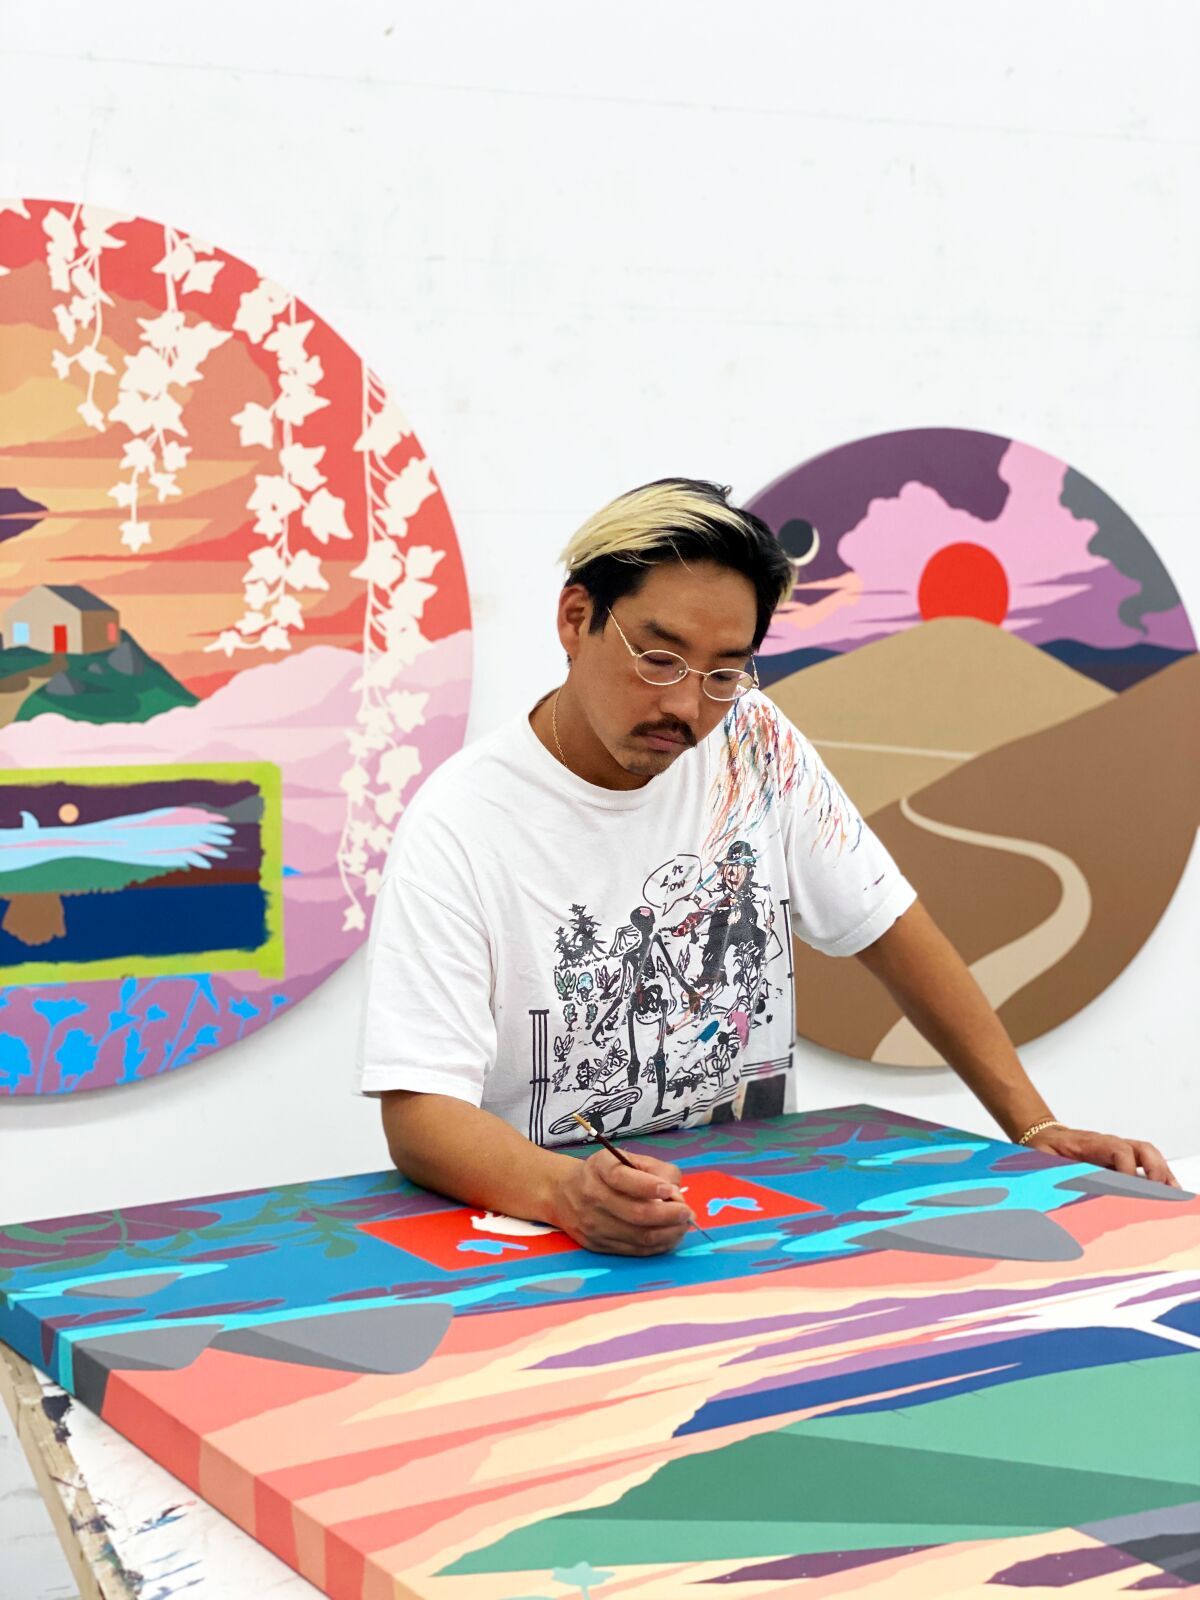 Artist Greg Ito will have an installation at the Institute of Contemporary Art in Encinitas.